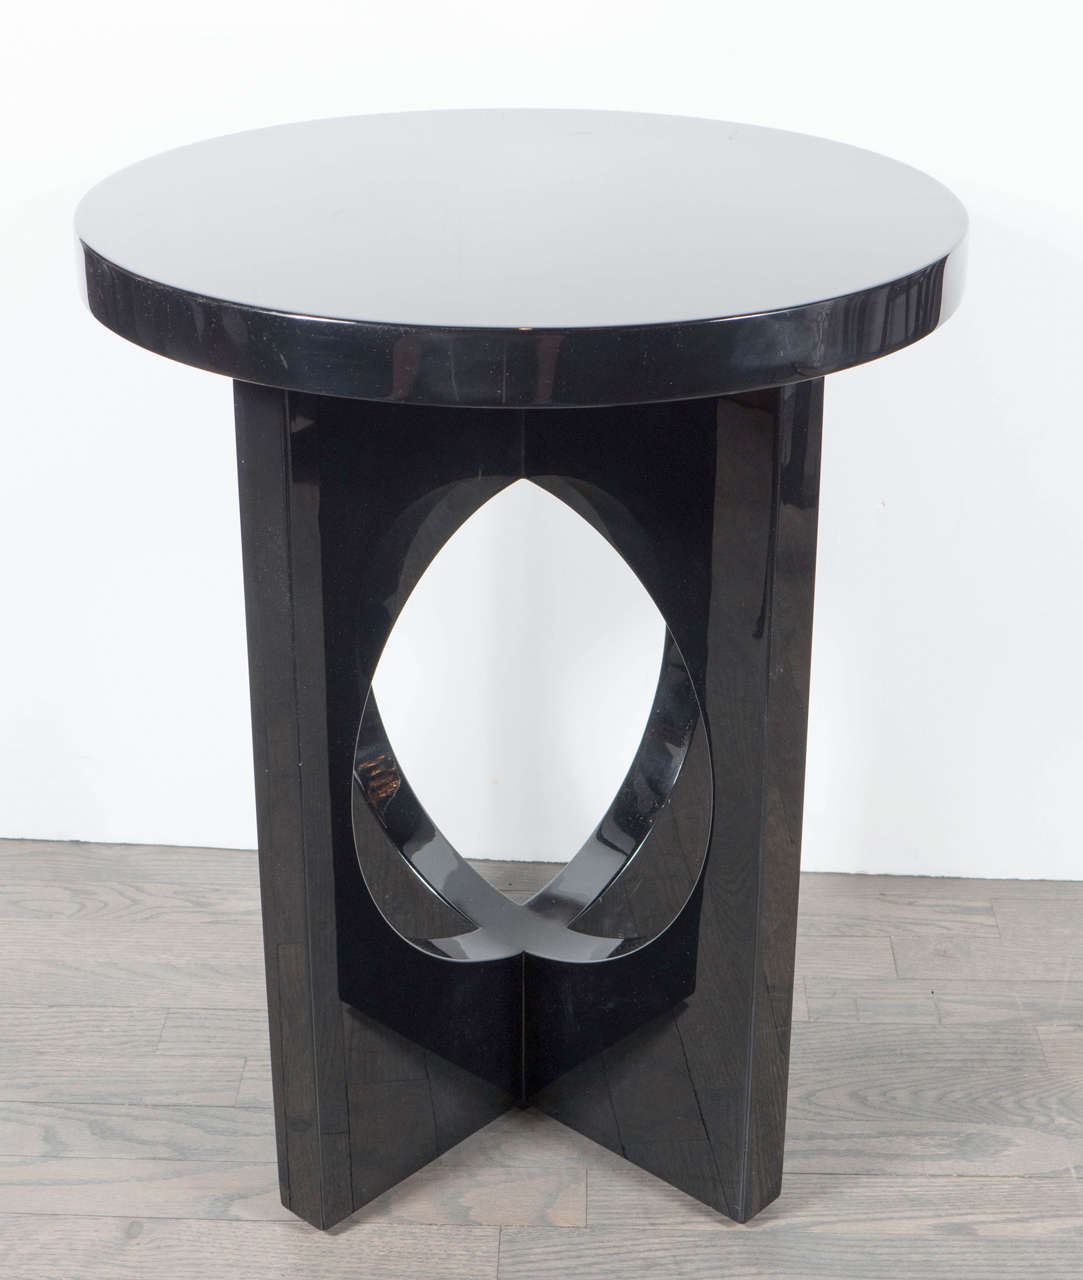 Pair of Mid-Century Modernist round occasional tables in black lacquer with intersecting criss-cross supports accentuated with stylized geometric cut-out designs. This sleek pair of Mid-Century Modernist tables feature thick rounded table tops that